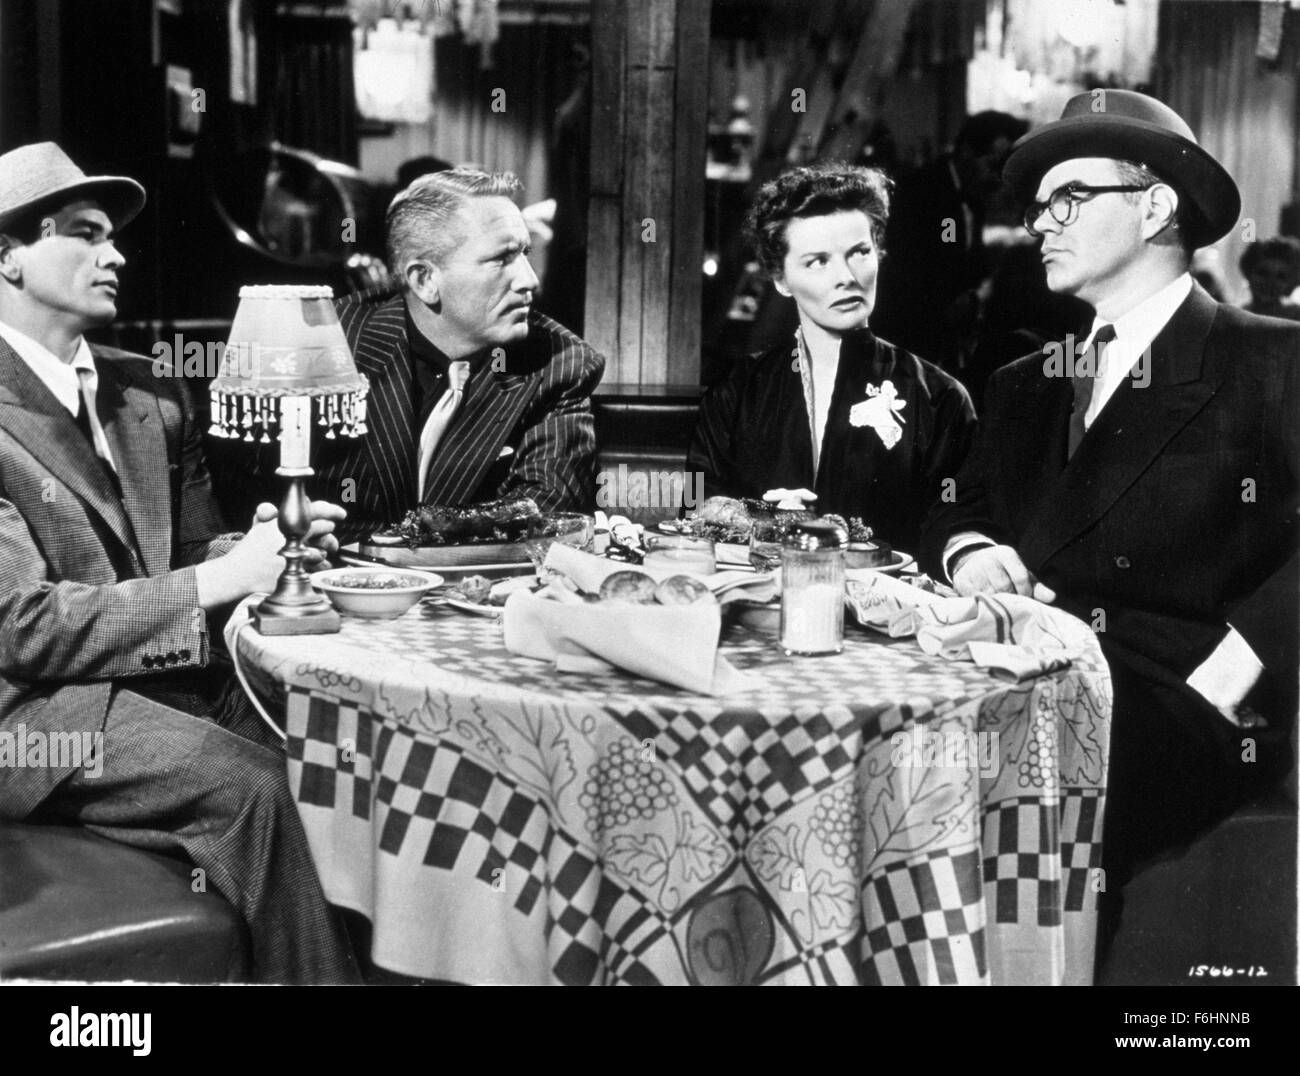 1952, Film Title: PAT AND MIKE, Director: GEORGE CUKOR, Studio: MGM, Pictured: CHARLES BRONSON, DINING ROOM TABLE, KATHARINE HEPBURN, GEORGE MATHEWS, SPENCER TRACY, CROOKS, GANGSTER, TABLE, SITTING, DINING, HAT, HAT - MENS, GLASSES. (Credit Image: SNAP) Stock Photo